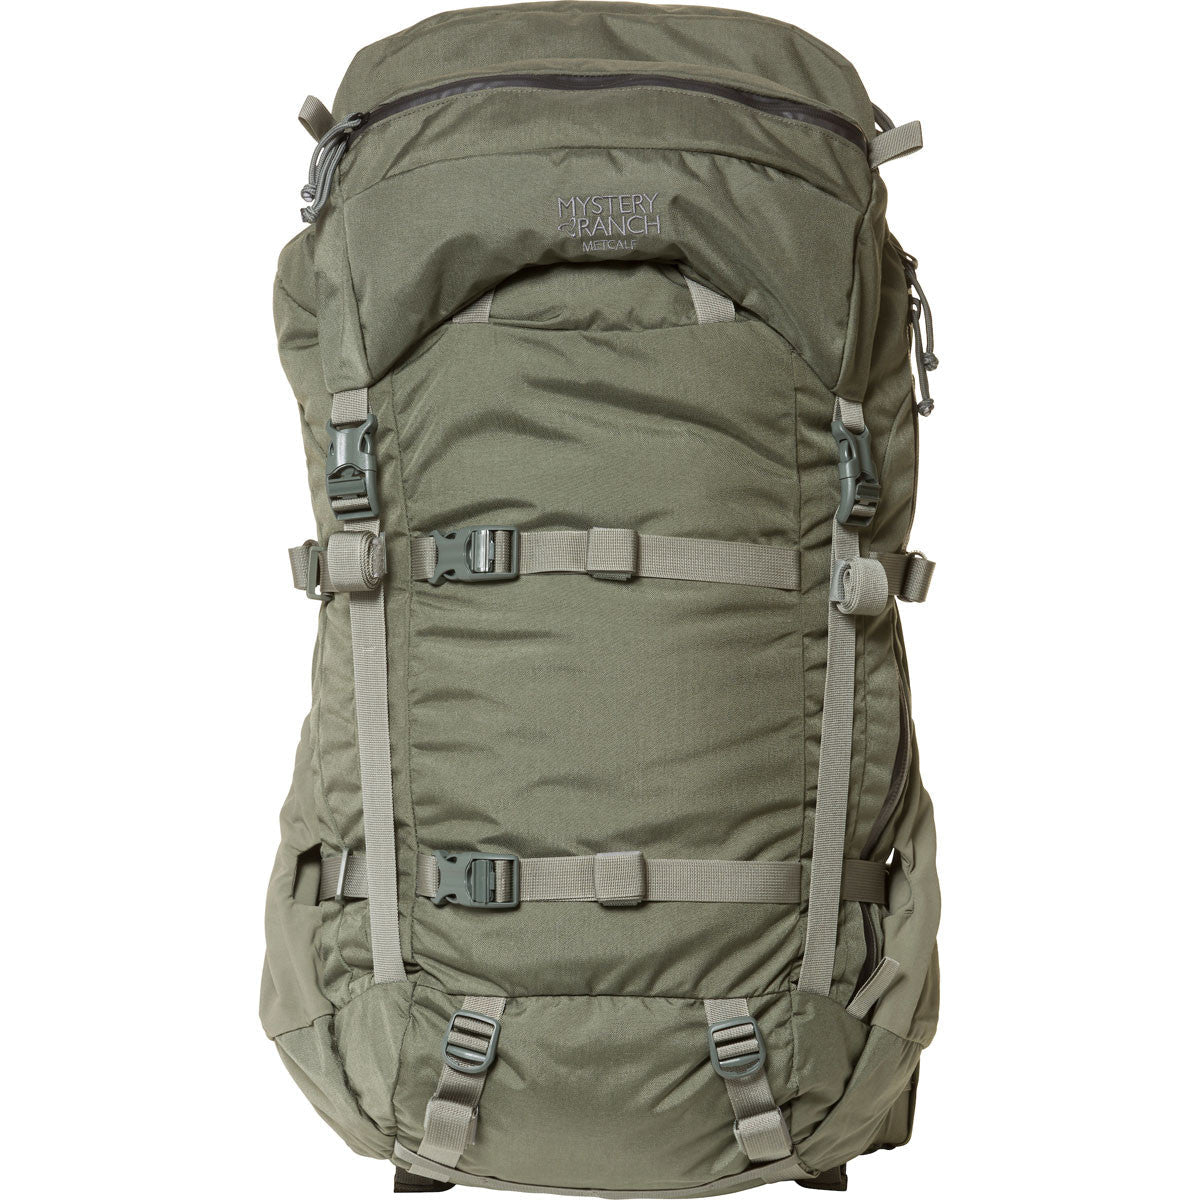 Mystery Ranch Metcalf Pack – Western Tactical Uniform and Gear